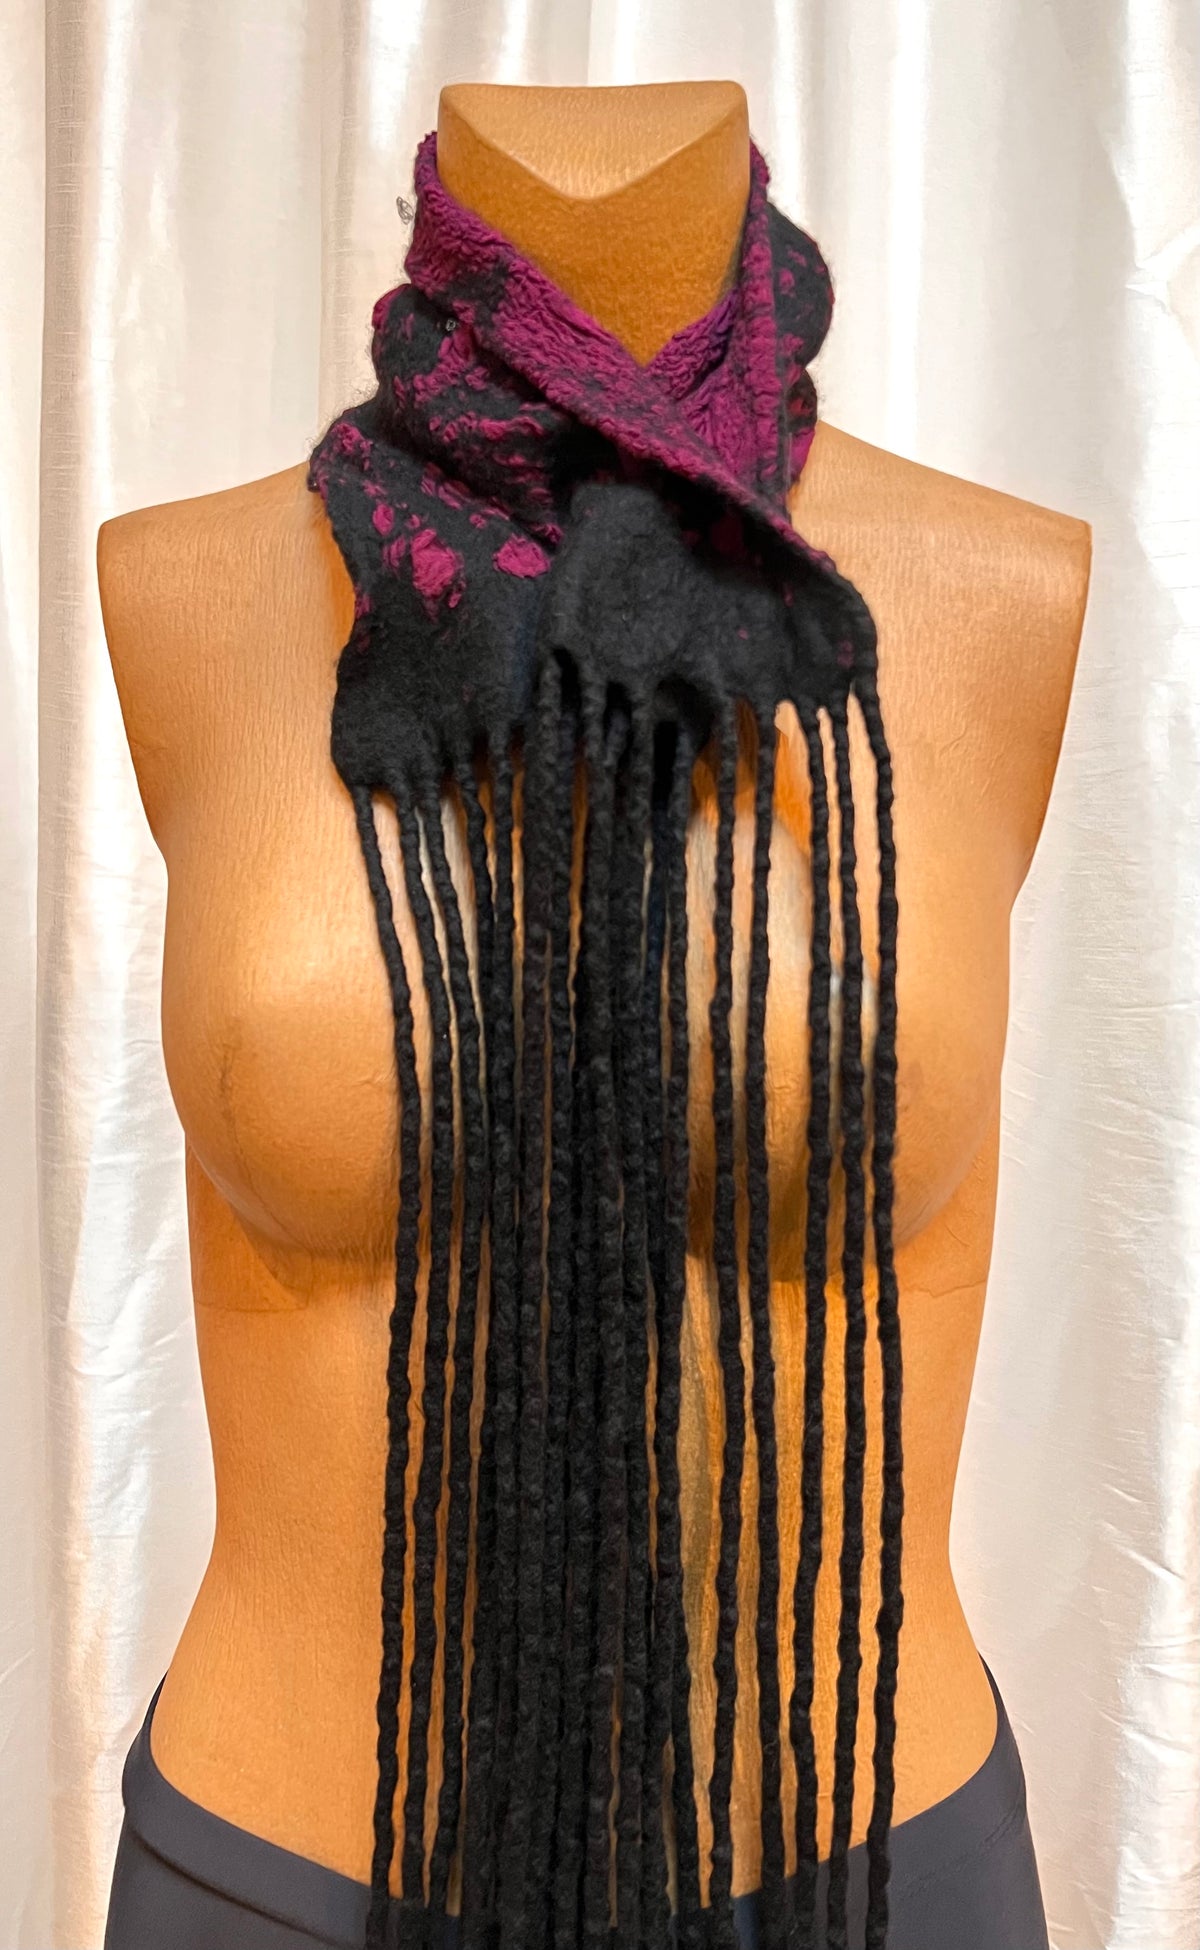 BlckBts Purple and Black Cowl Neck Scarf With Fringe